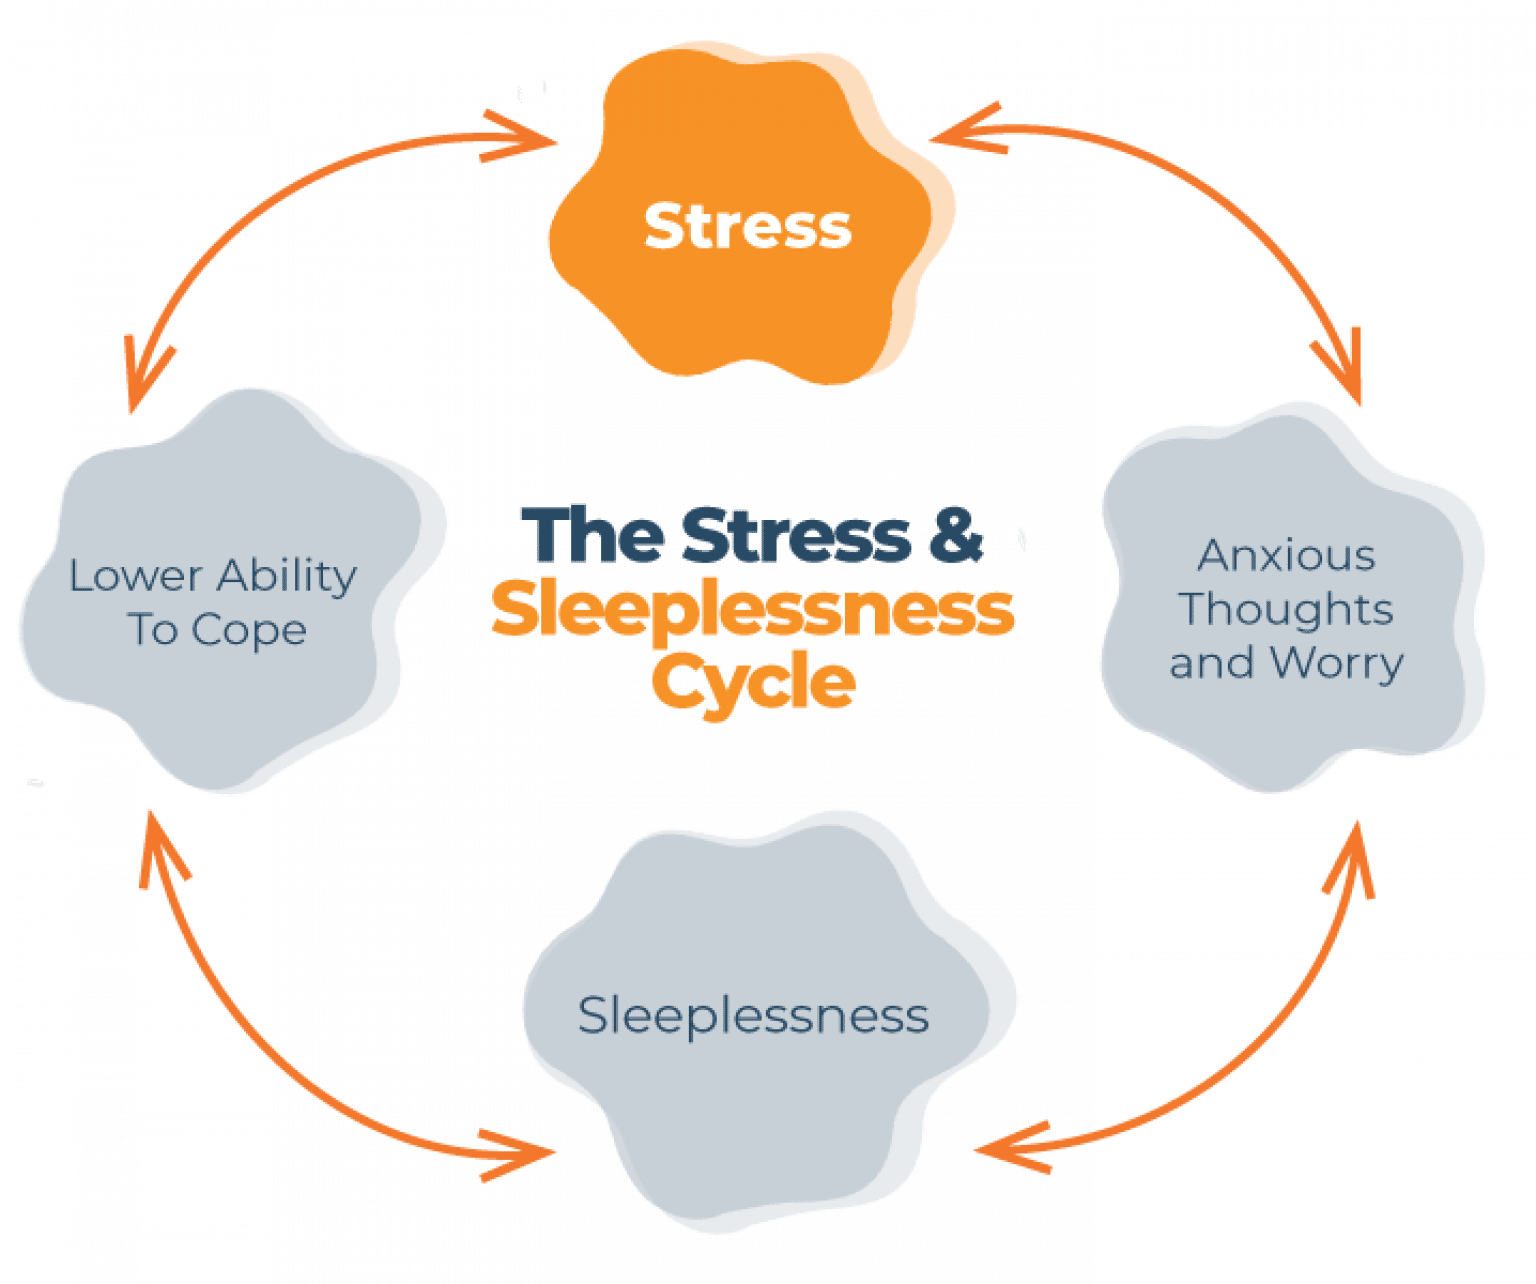 Guide to Stress and Sleep